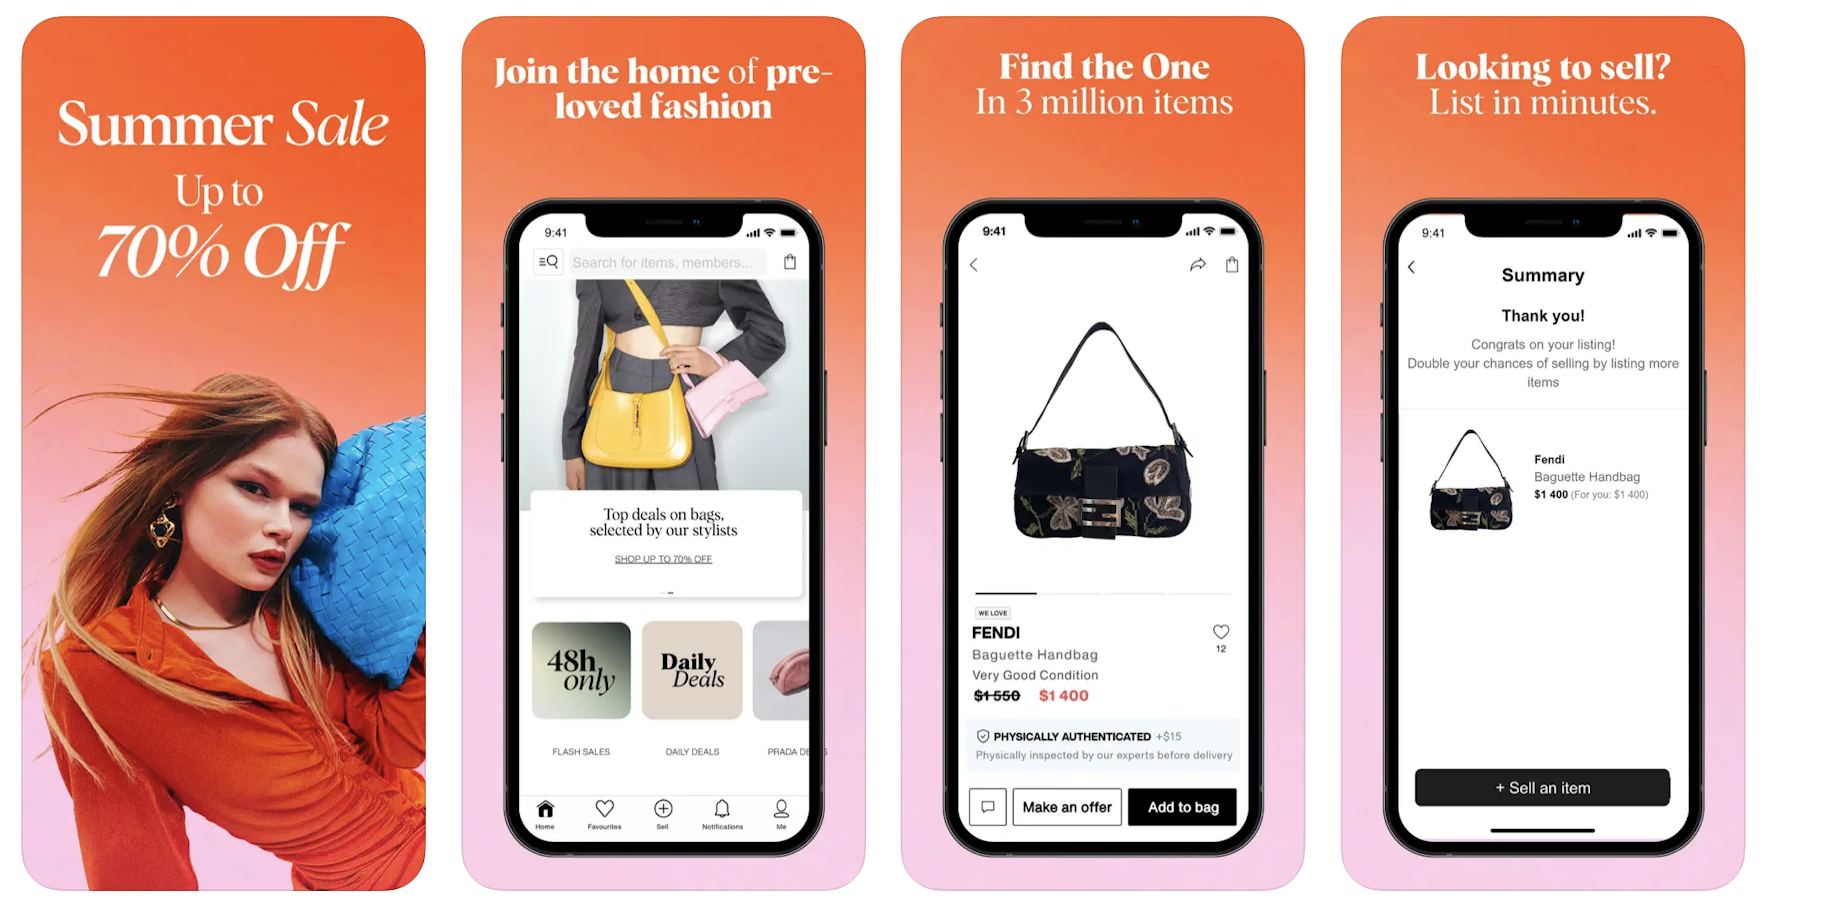 Vestiaire Collective: Top money making app for luxury fashion